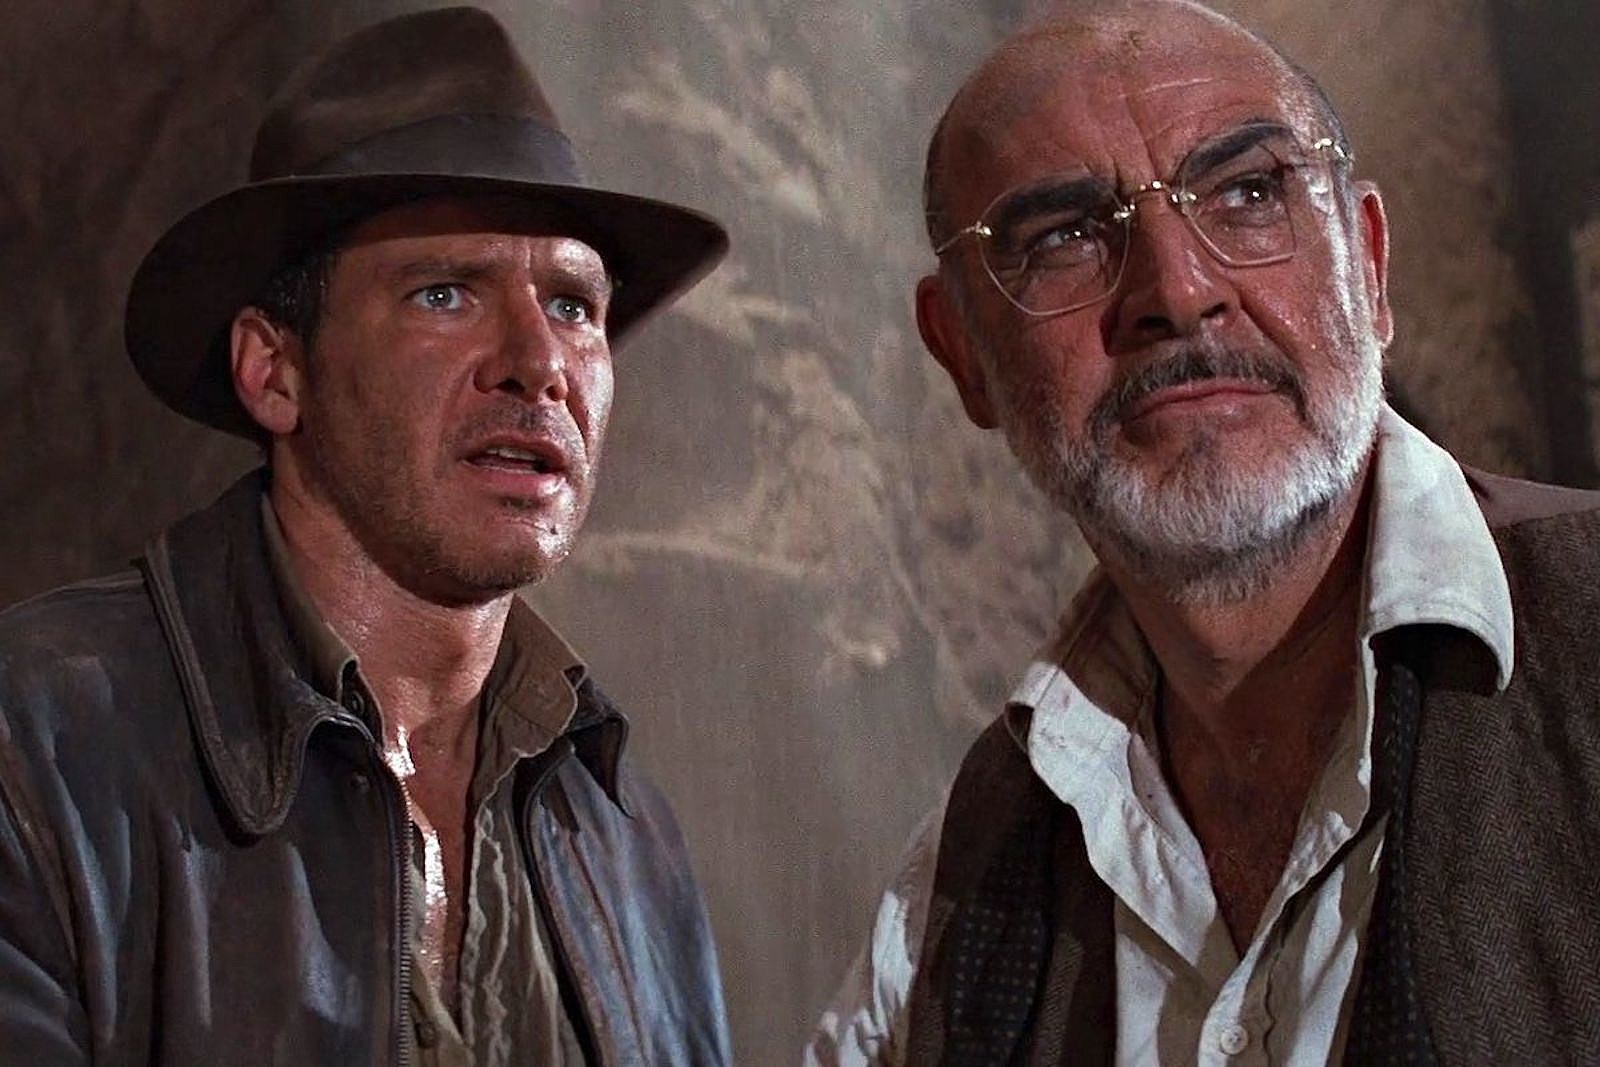 Harrison Ford Facts  - Hollywood father-son duo Sean Connery and Harrison Ford are only 12 years apart in age.-u/zmanoomzaki